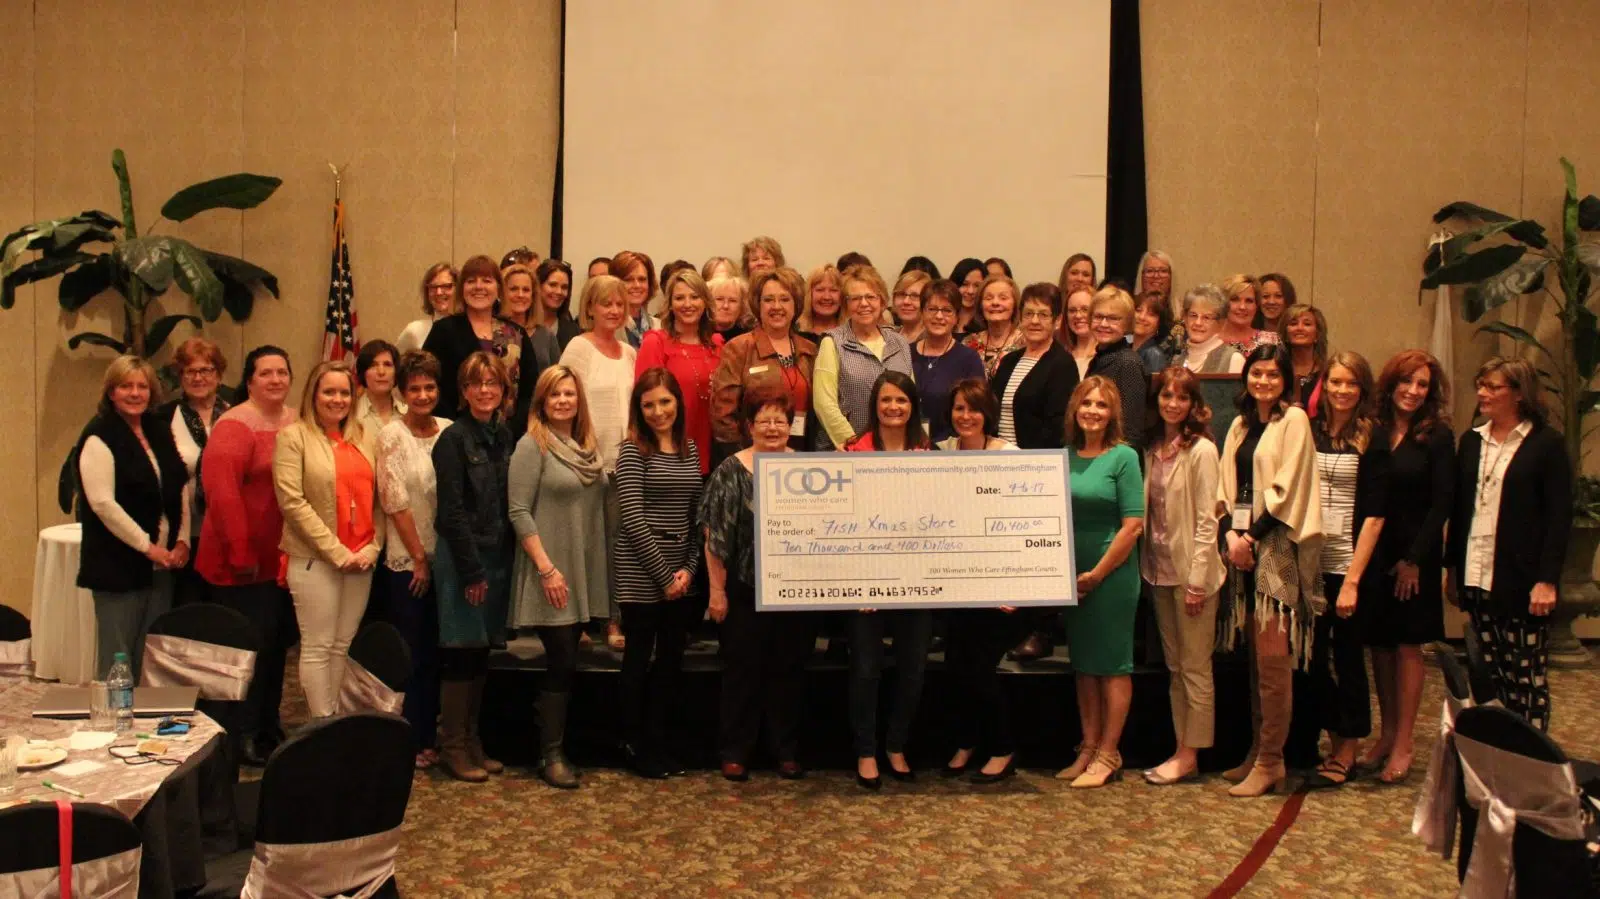 100+ Women Who Care of Effingham County.